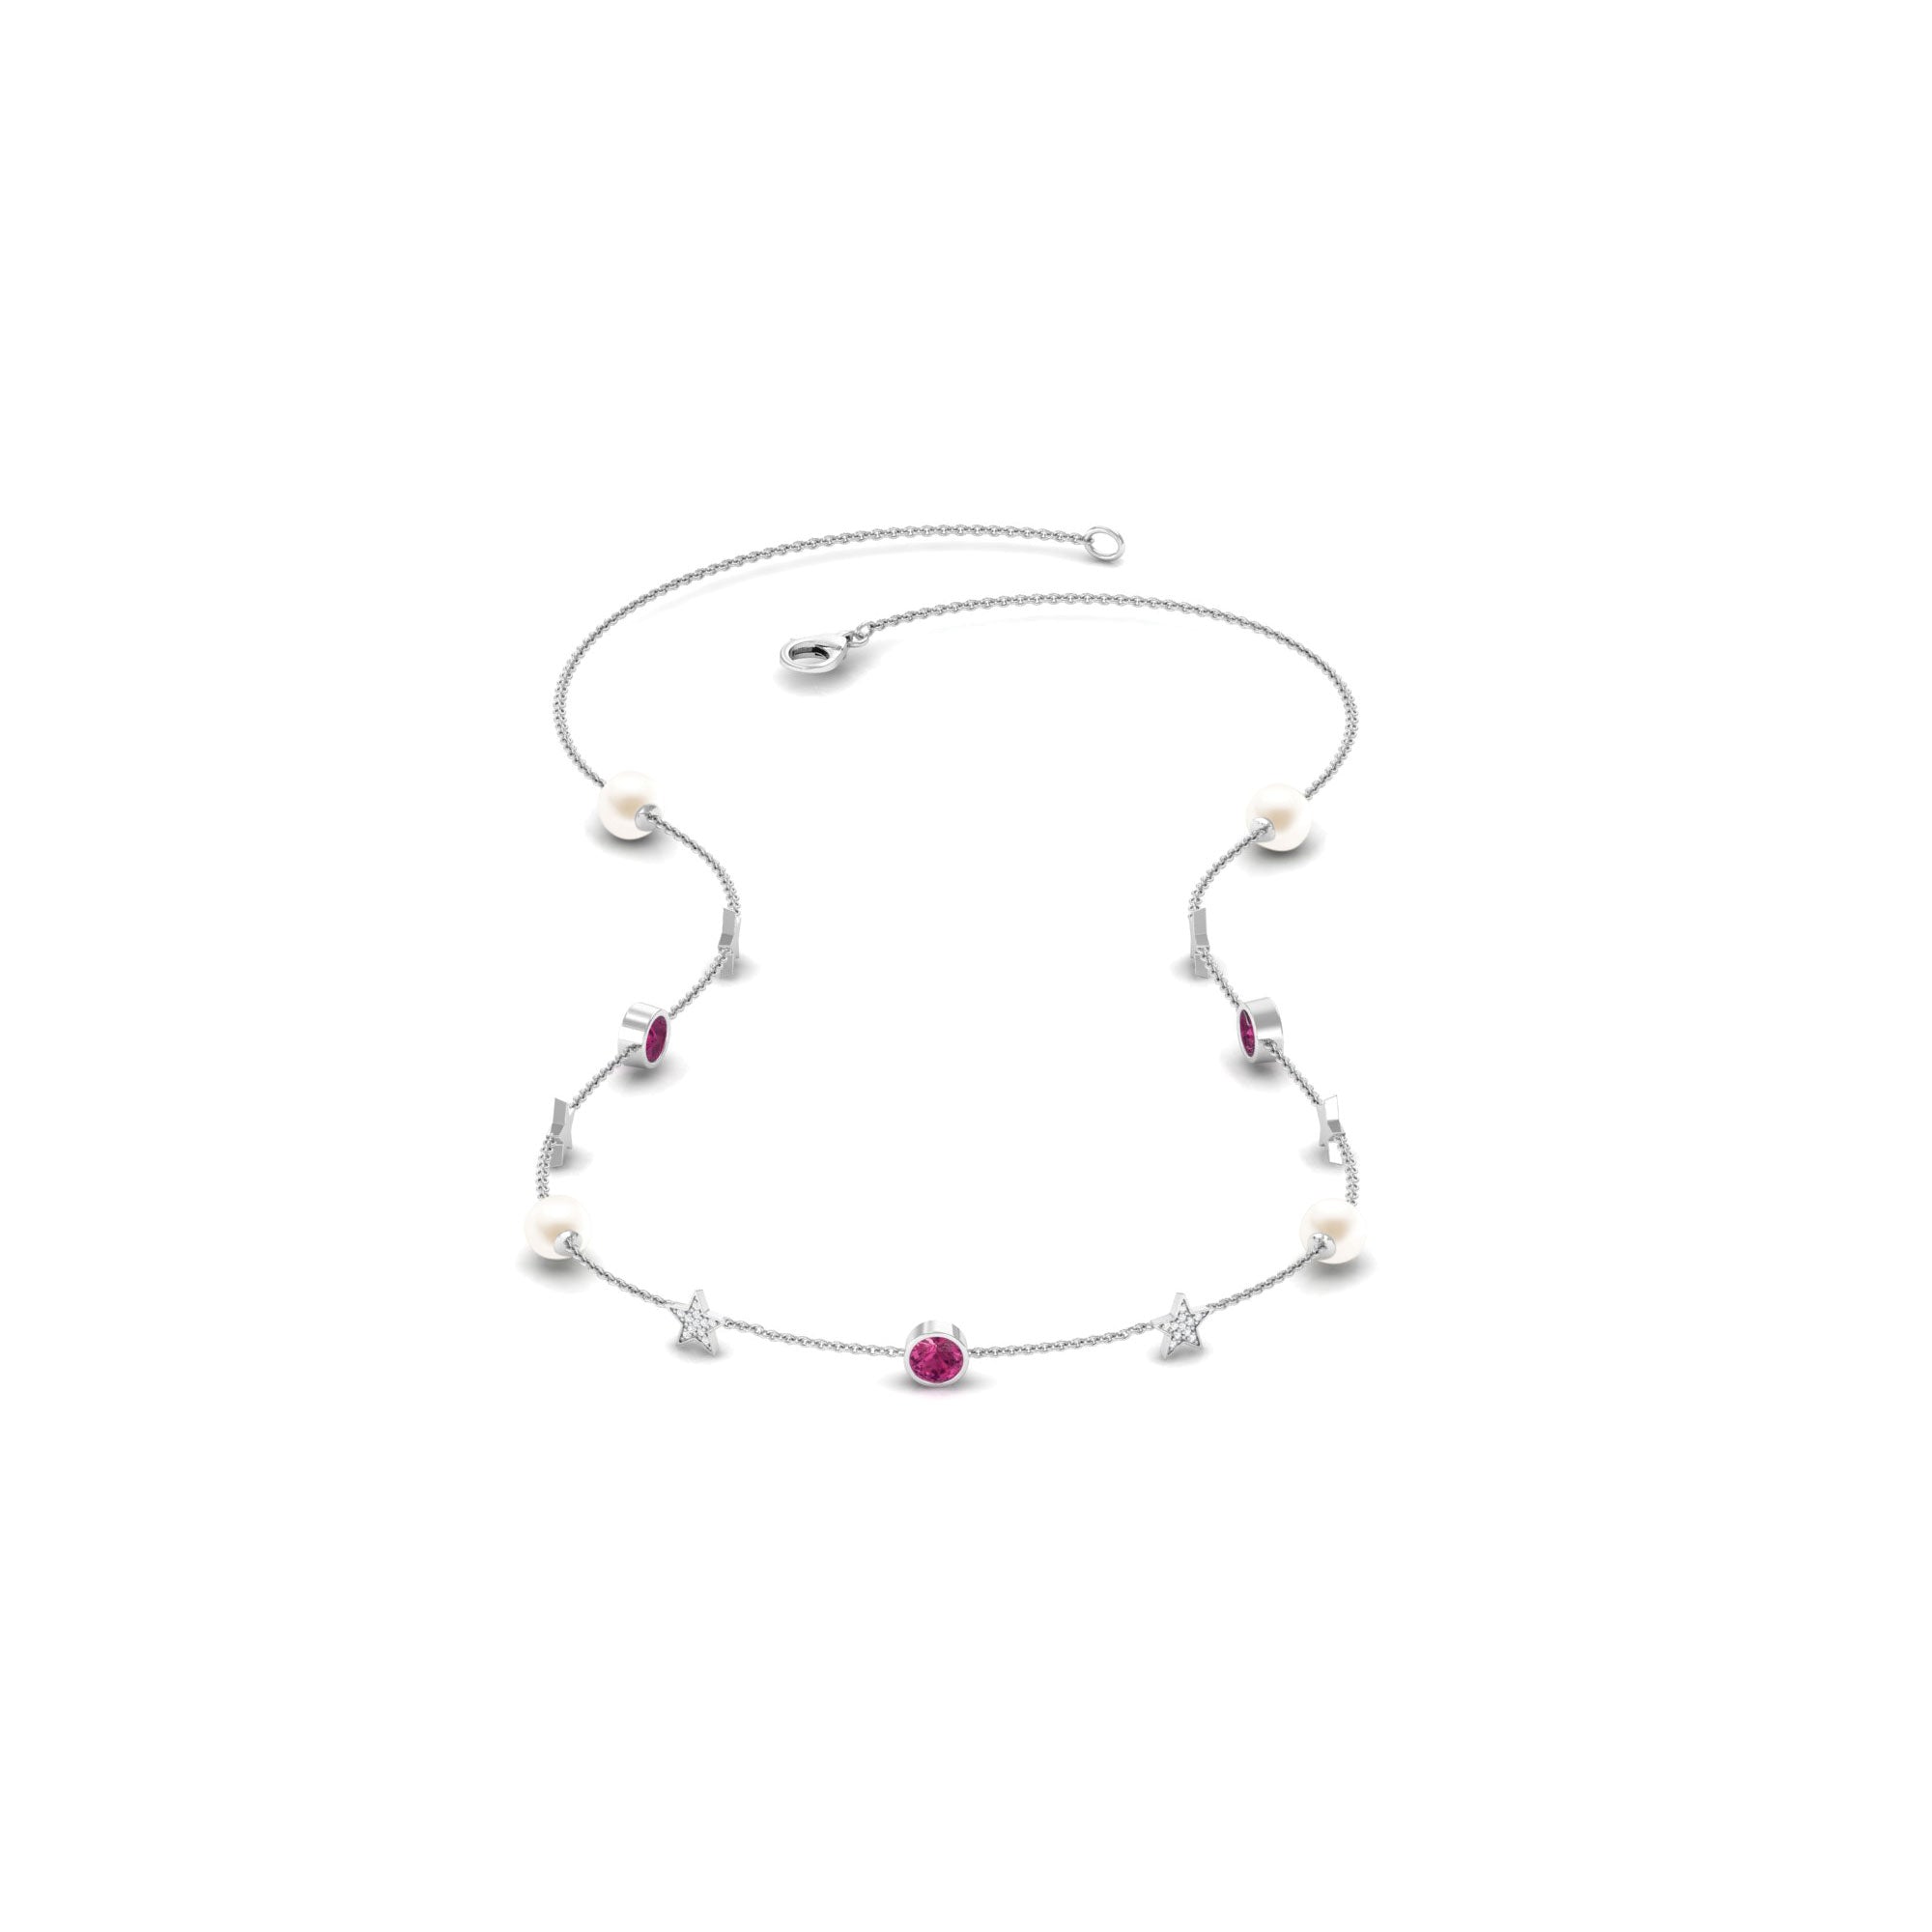 Freshwater Pearl Station Chain Necklace with Tourmaline and Diamond Freshwater Pearl-AAAA Quality - Arisha Jewels